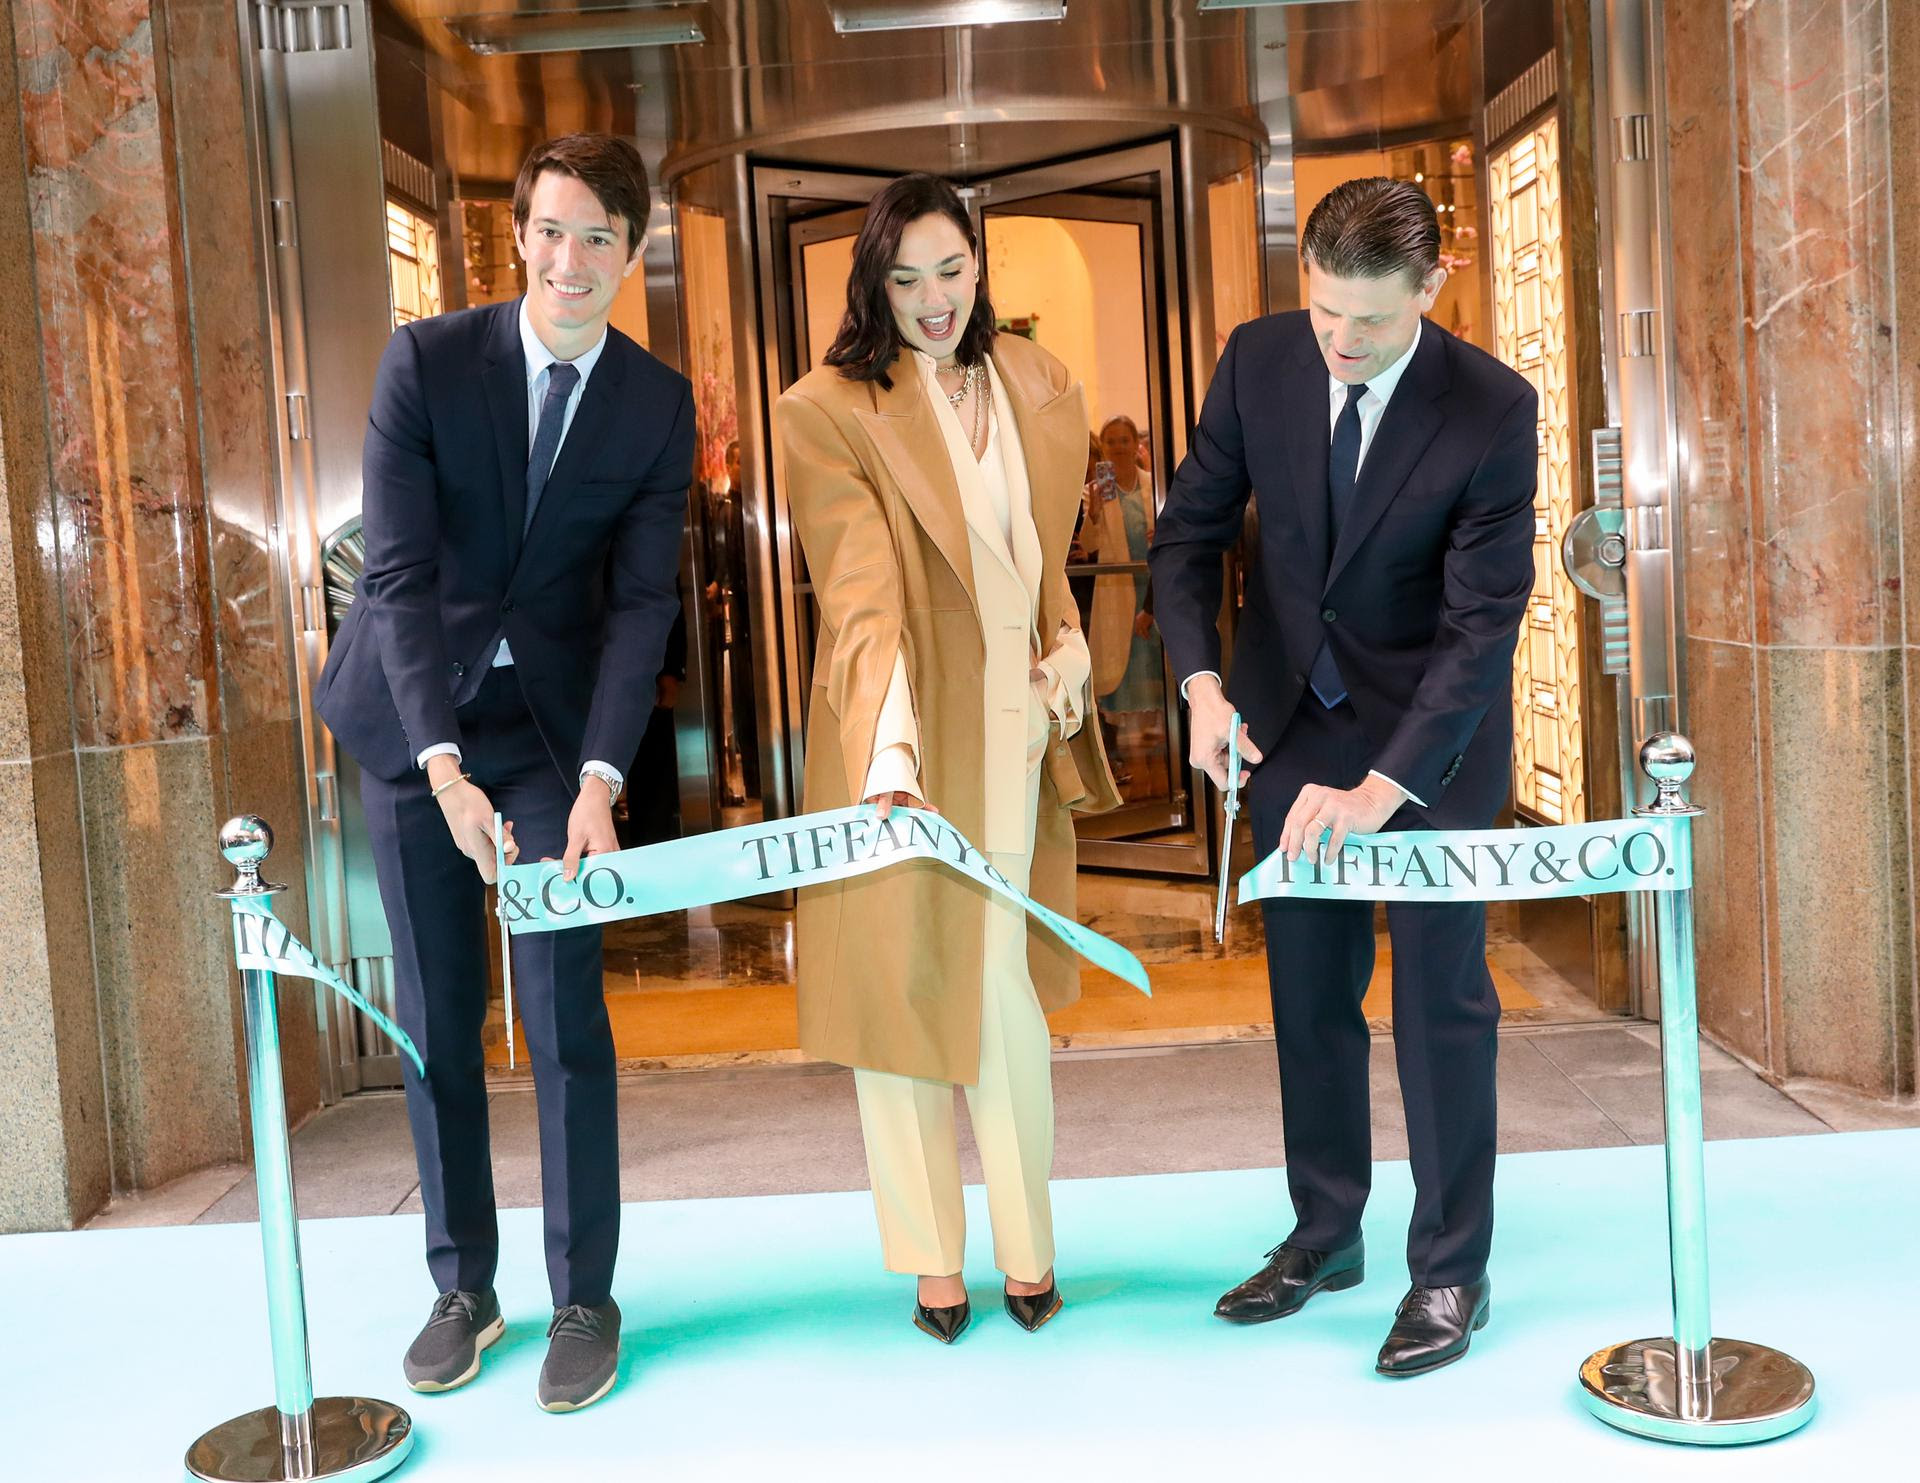 Tiffany & Co. Celebrates the Reopening of The Landmark with a Ribbon-Cutting Ceremony with House Ambassador Gal Gadot